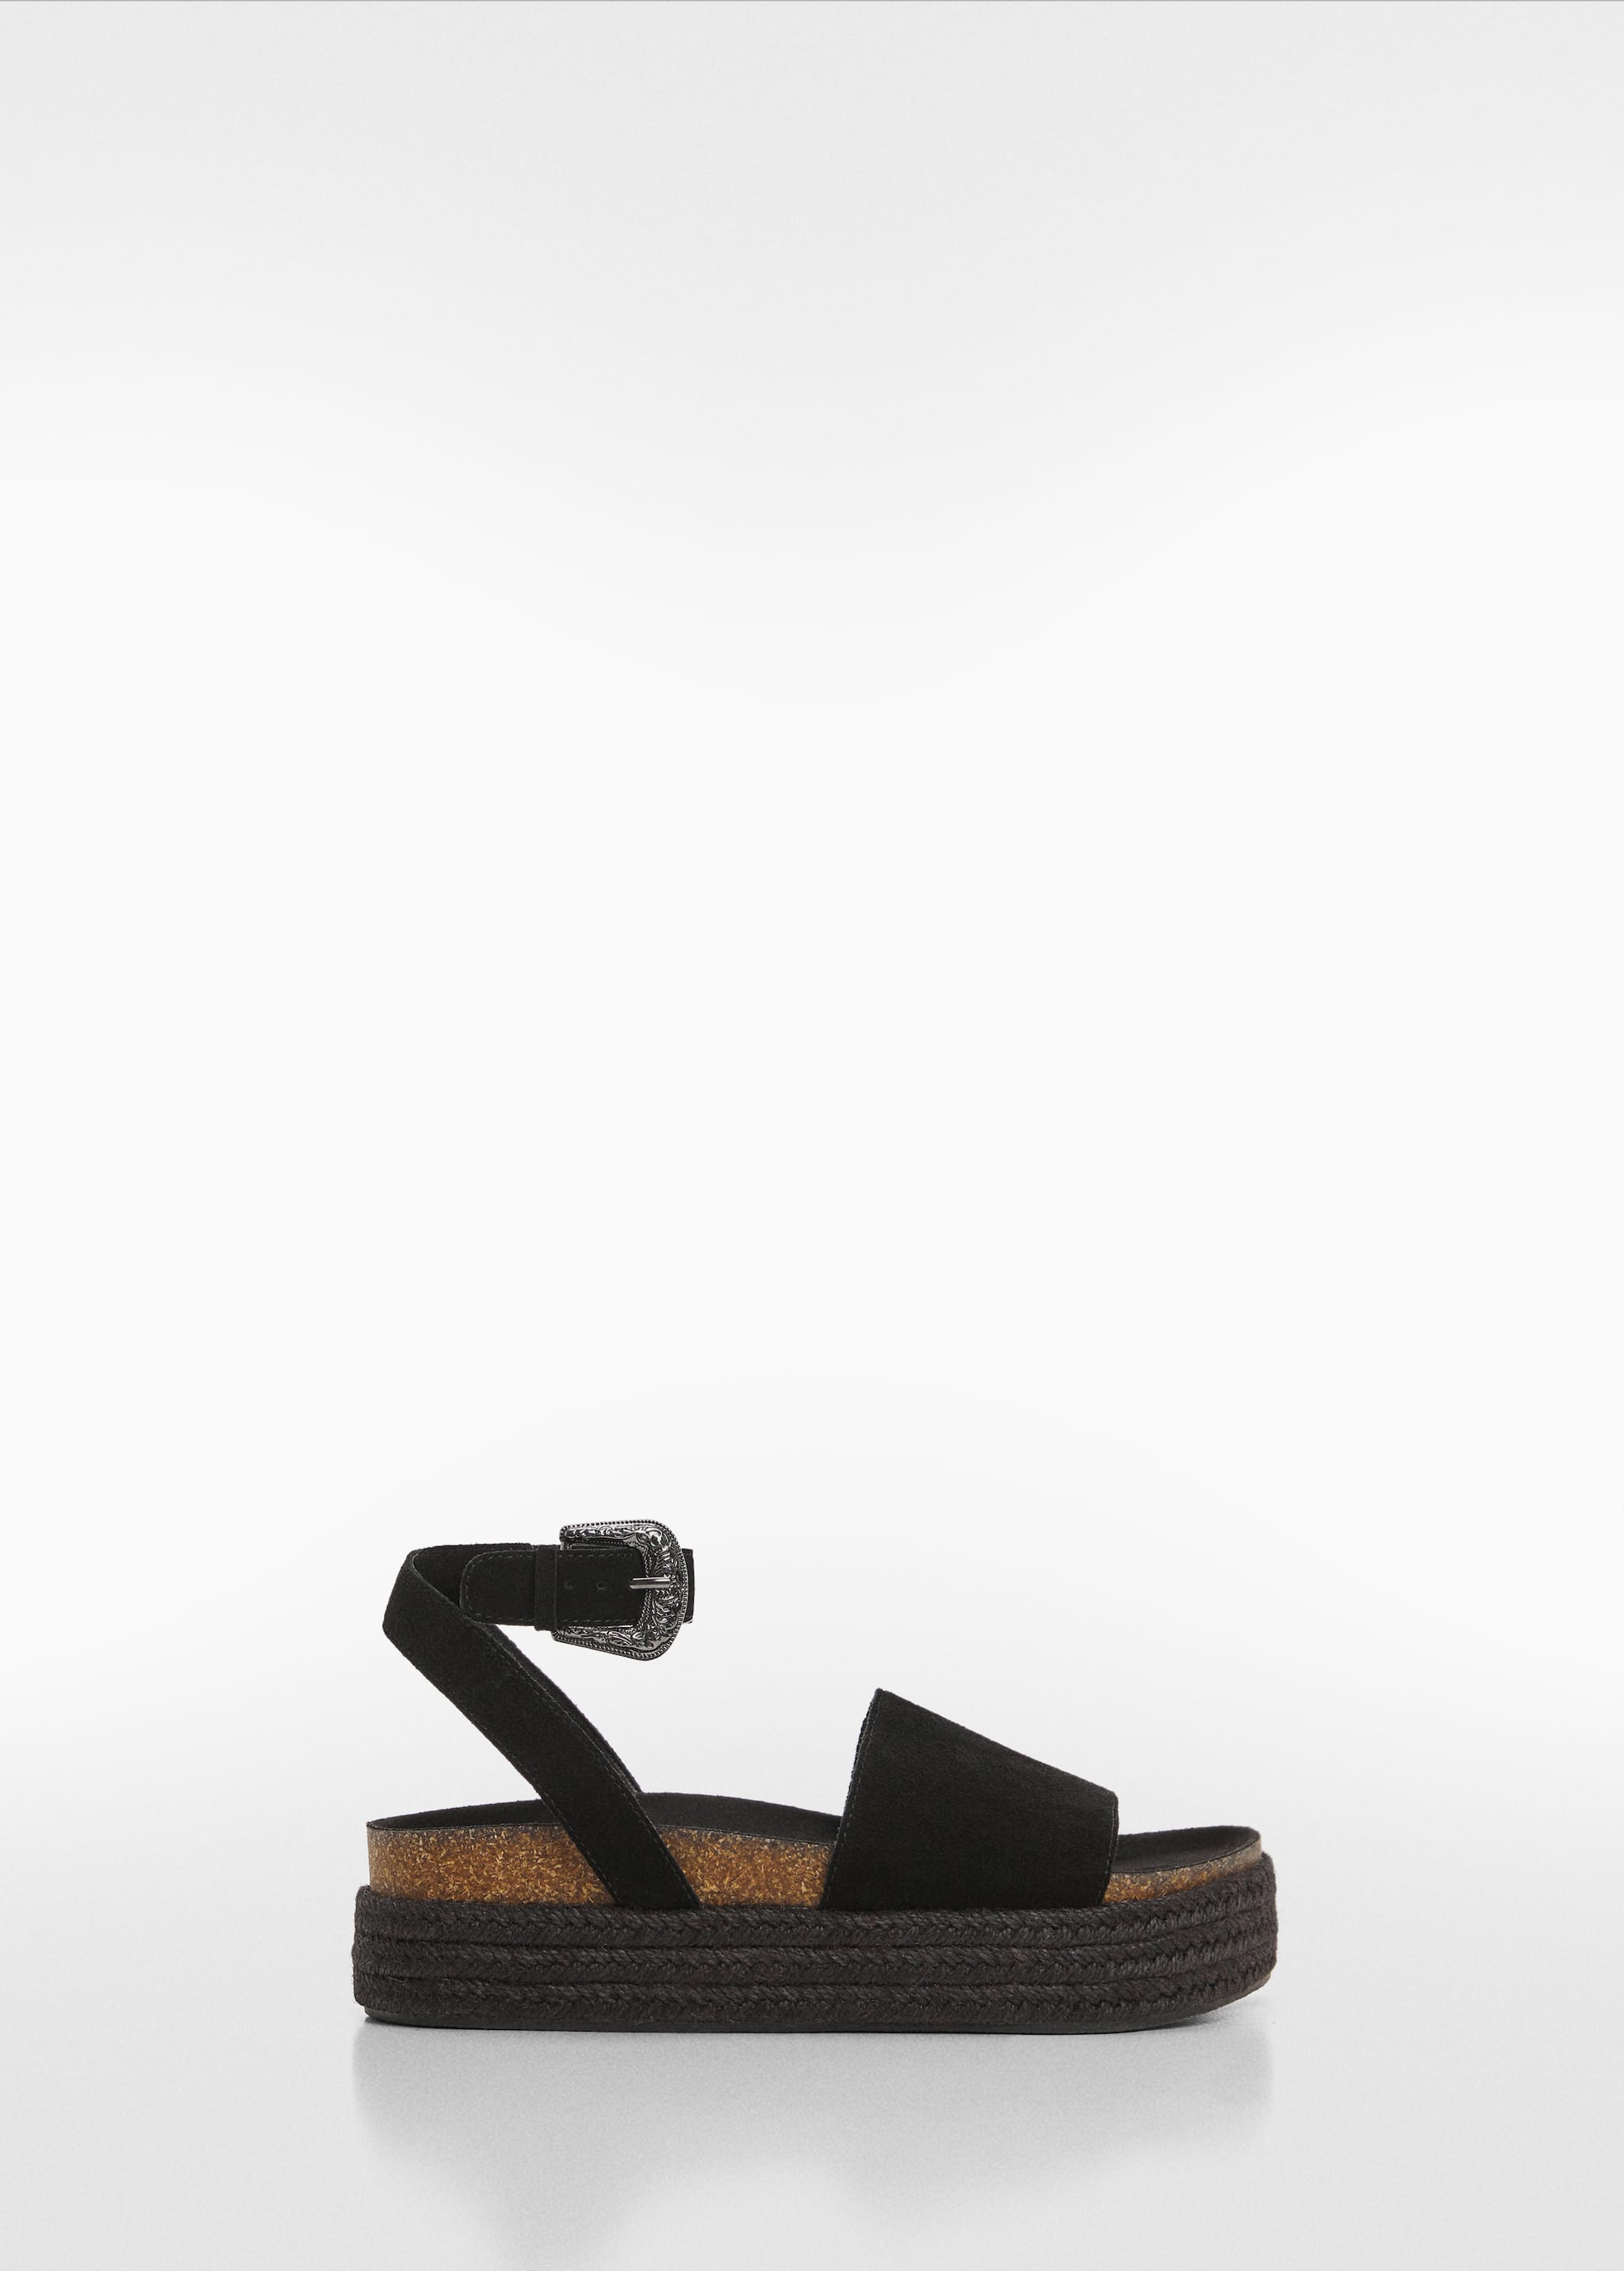 Platform leather sandals - Article without model